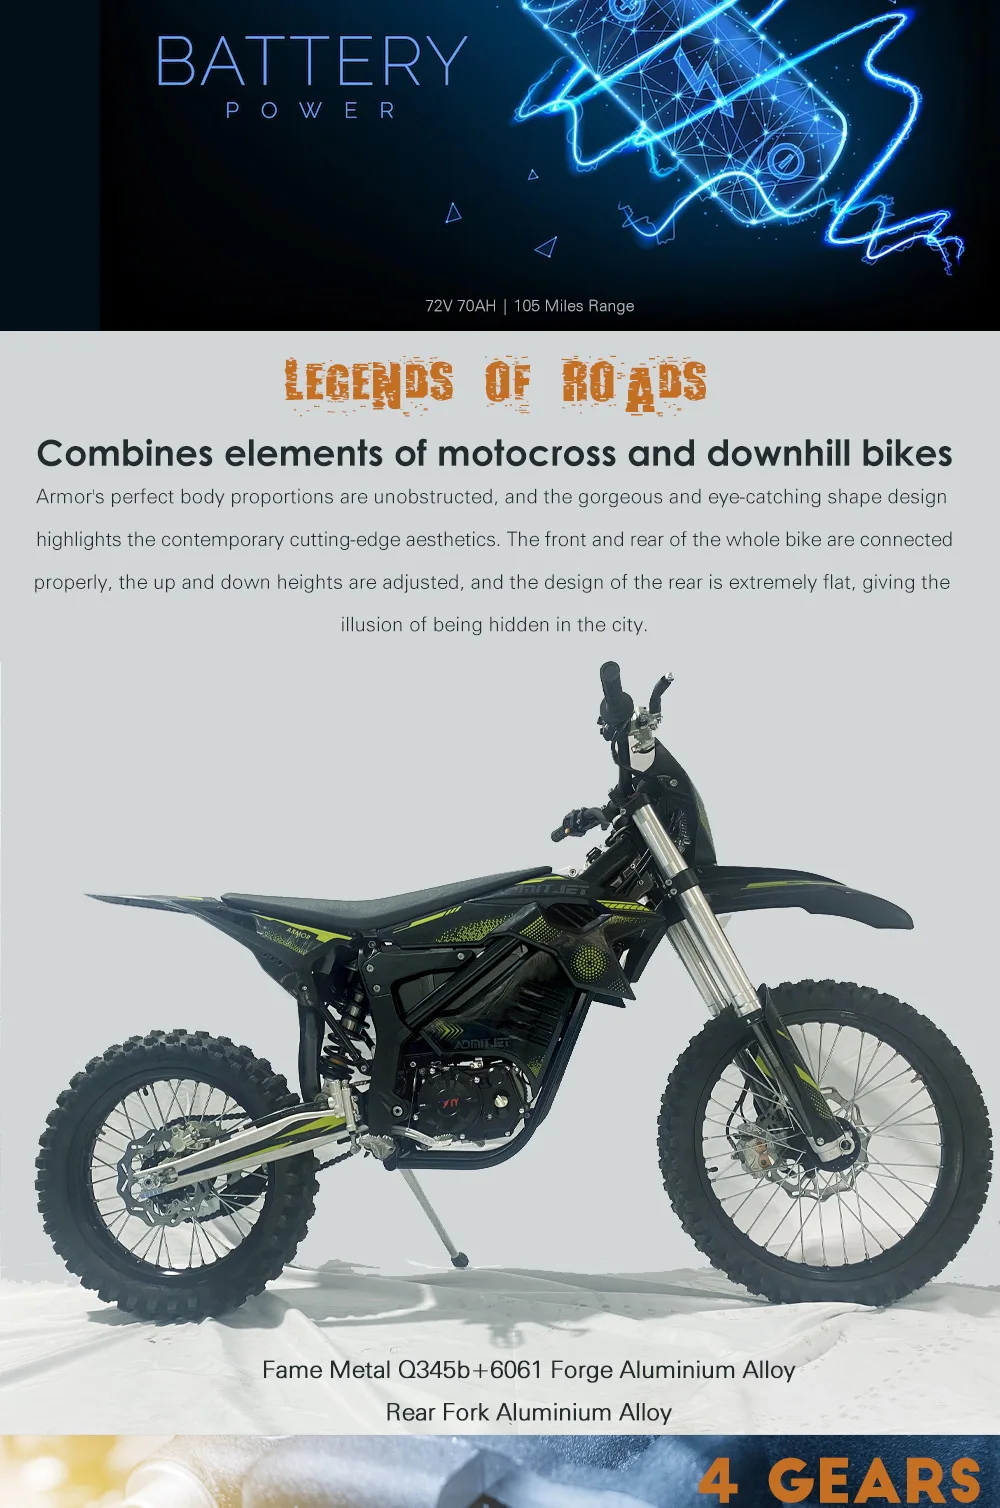 E Dirt Bike Offroad Ebikes Electric Motorcycle For Adult